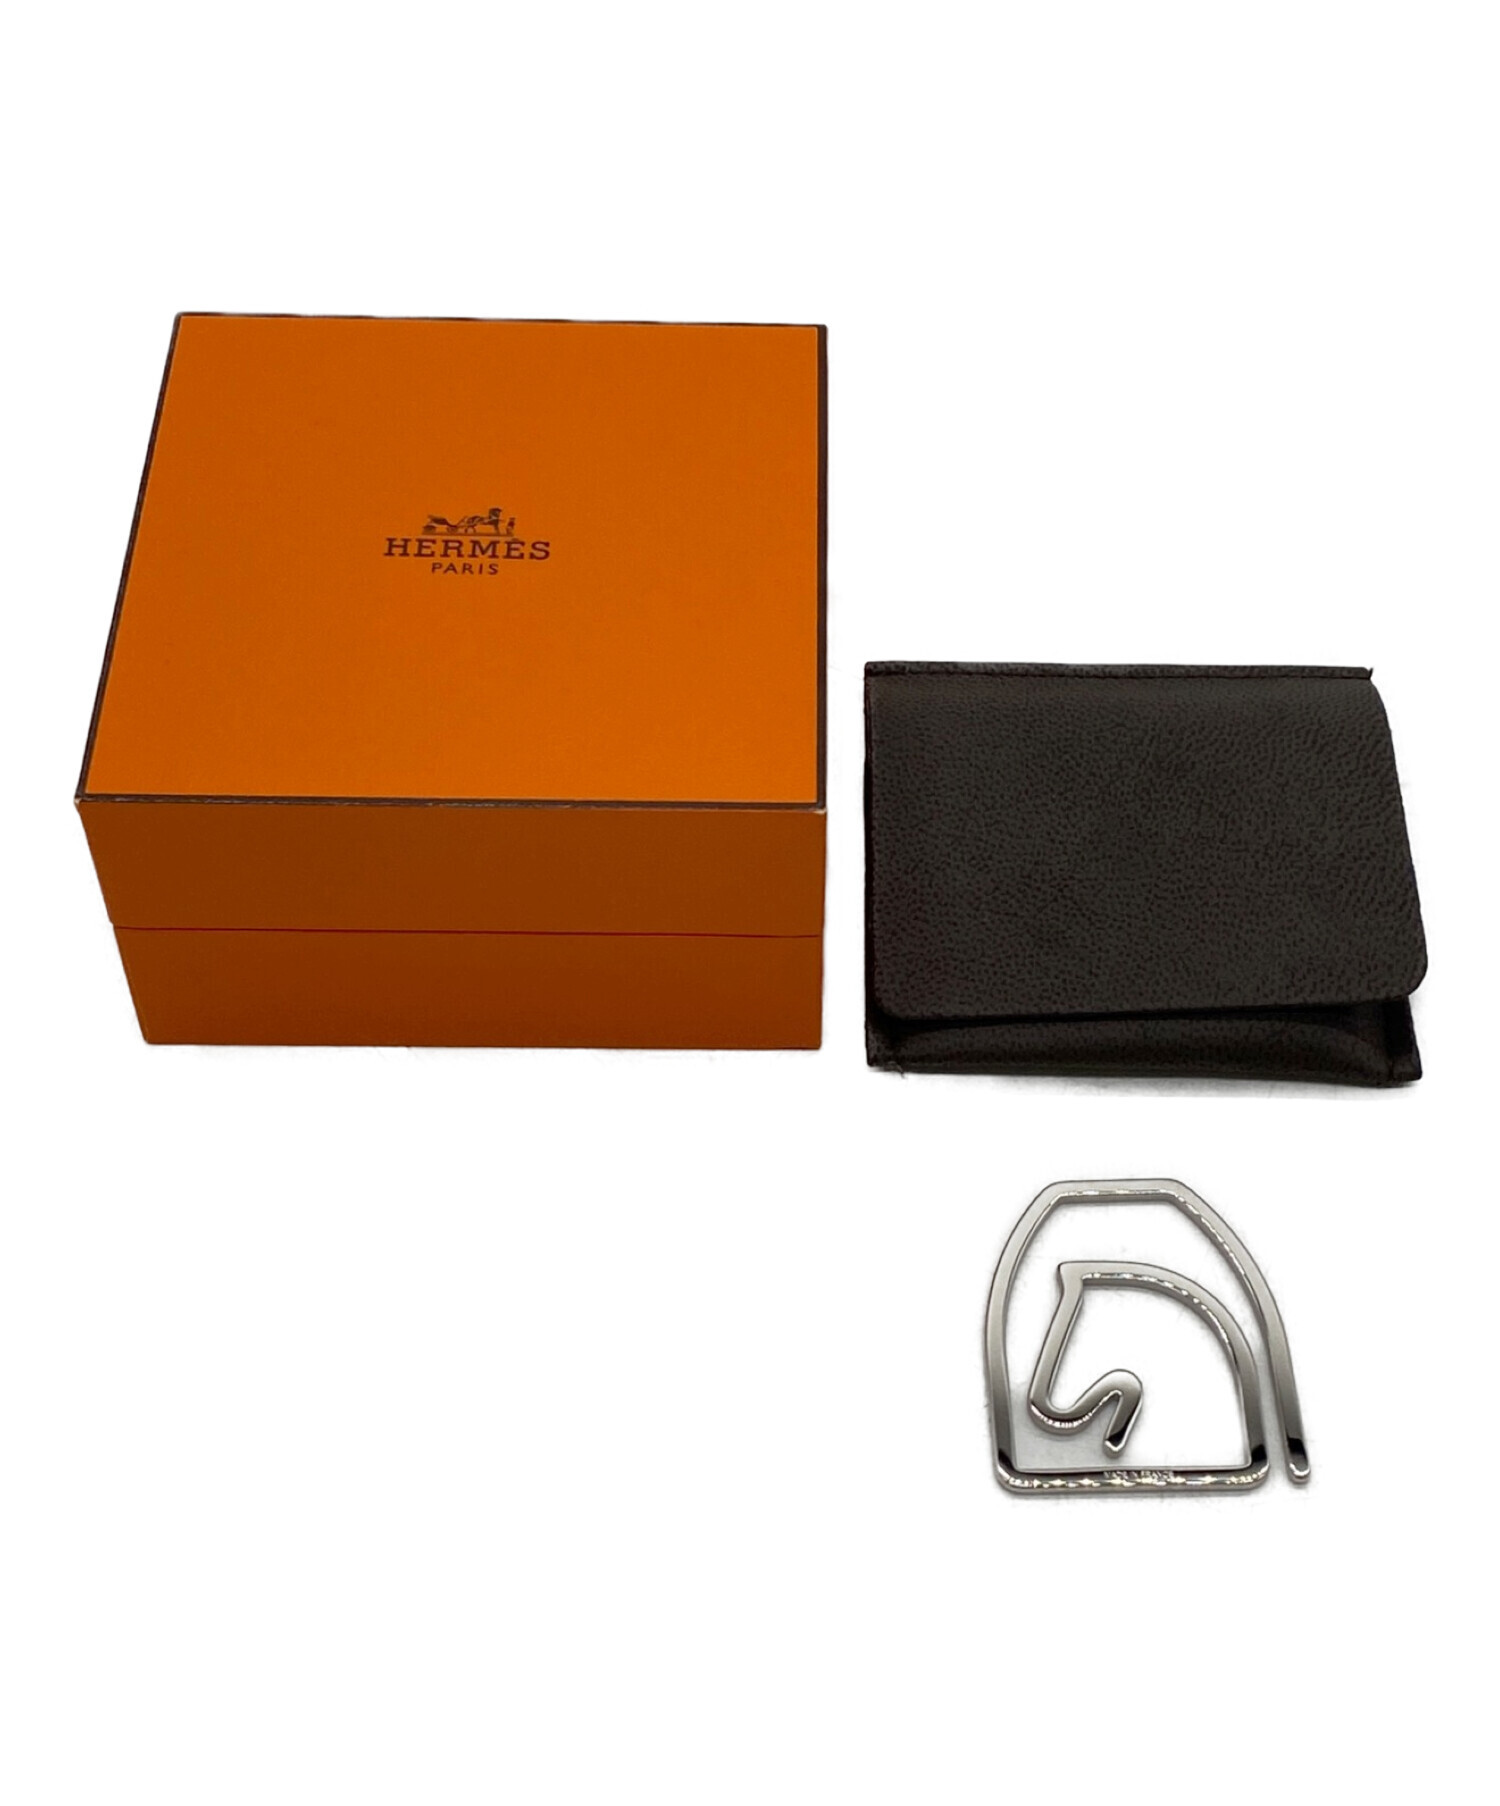 sold out    HERMES マネークリップ